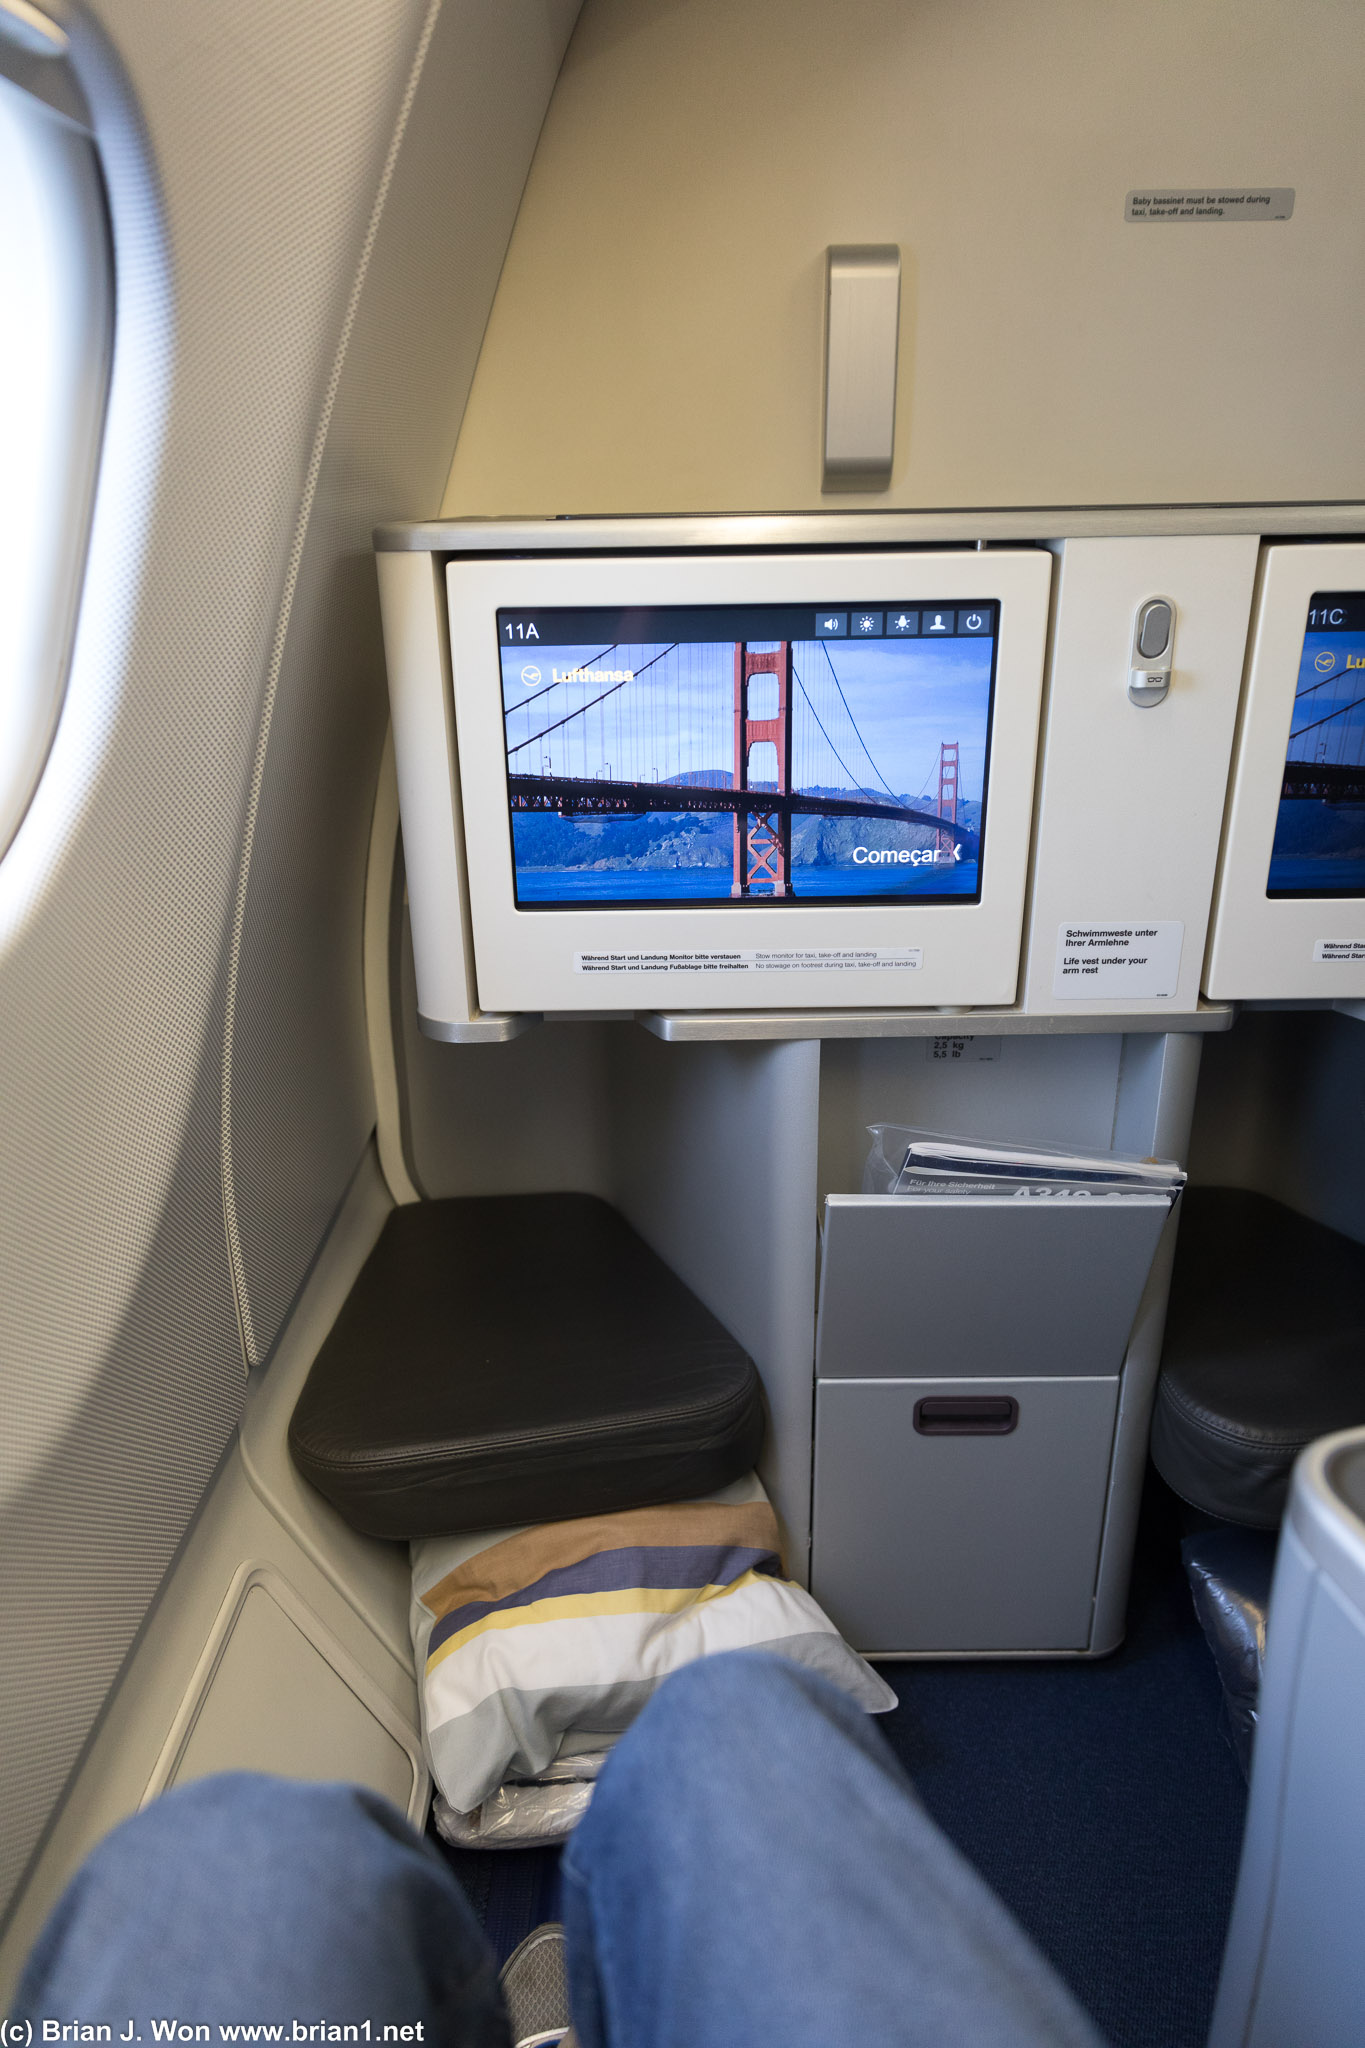 Doesn't feel very different from United's business class.